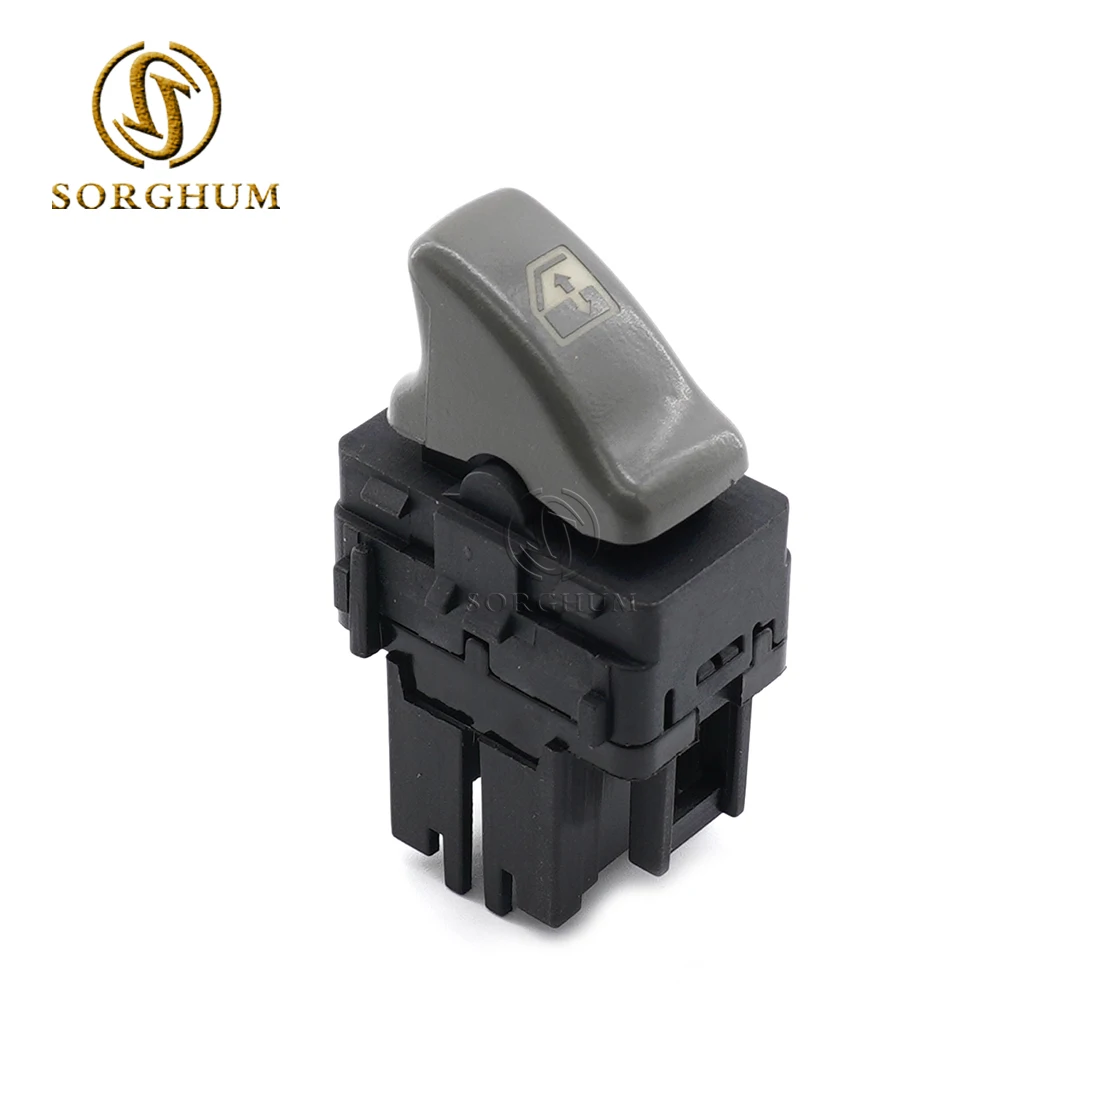 

Sorghum 10409721 Car Front Right Passenger Side Electric Power Window Lifter Control Switch Button For Pontiac Montana 2000-2005